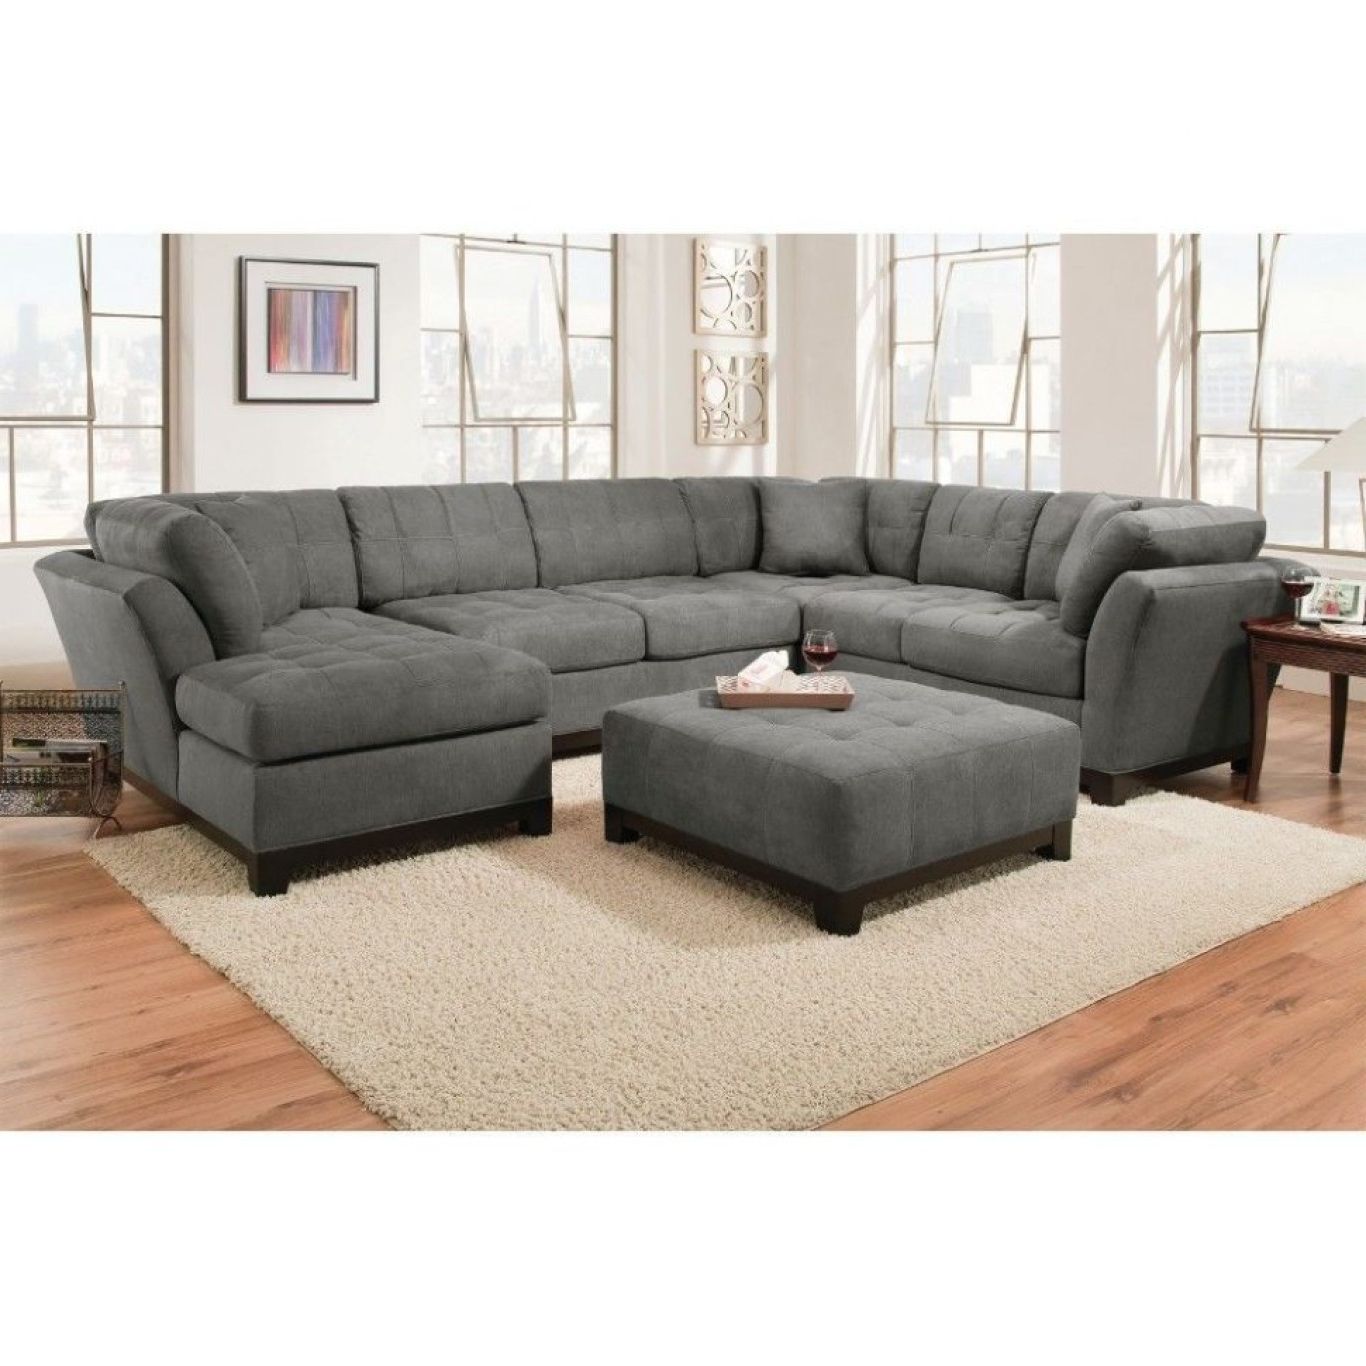 Furniture Row Sectionals Regarding Trendy Furniture Row Sectional Sofas (View 3 of 20)